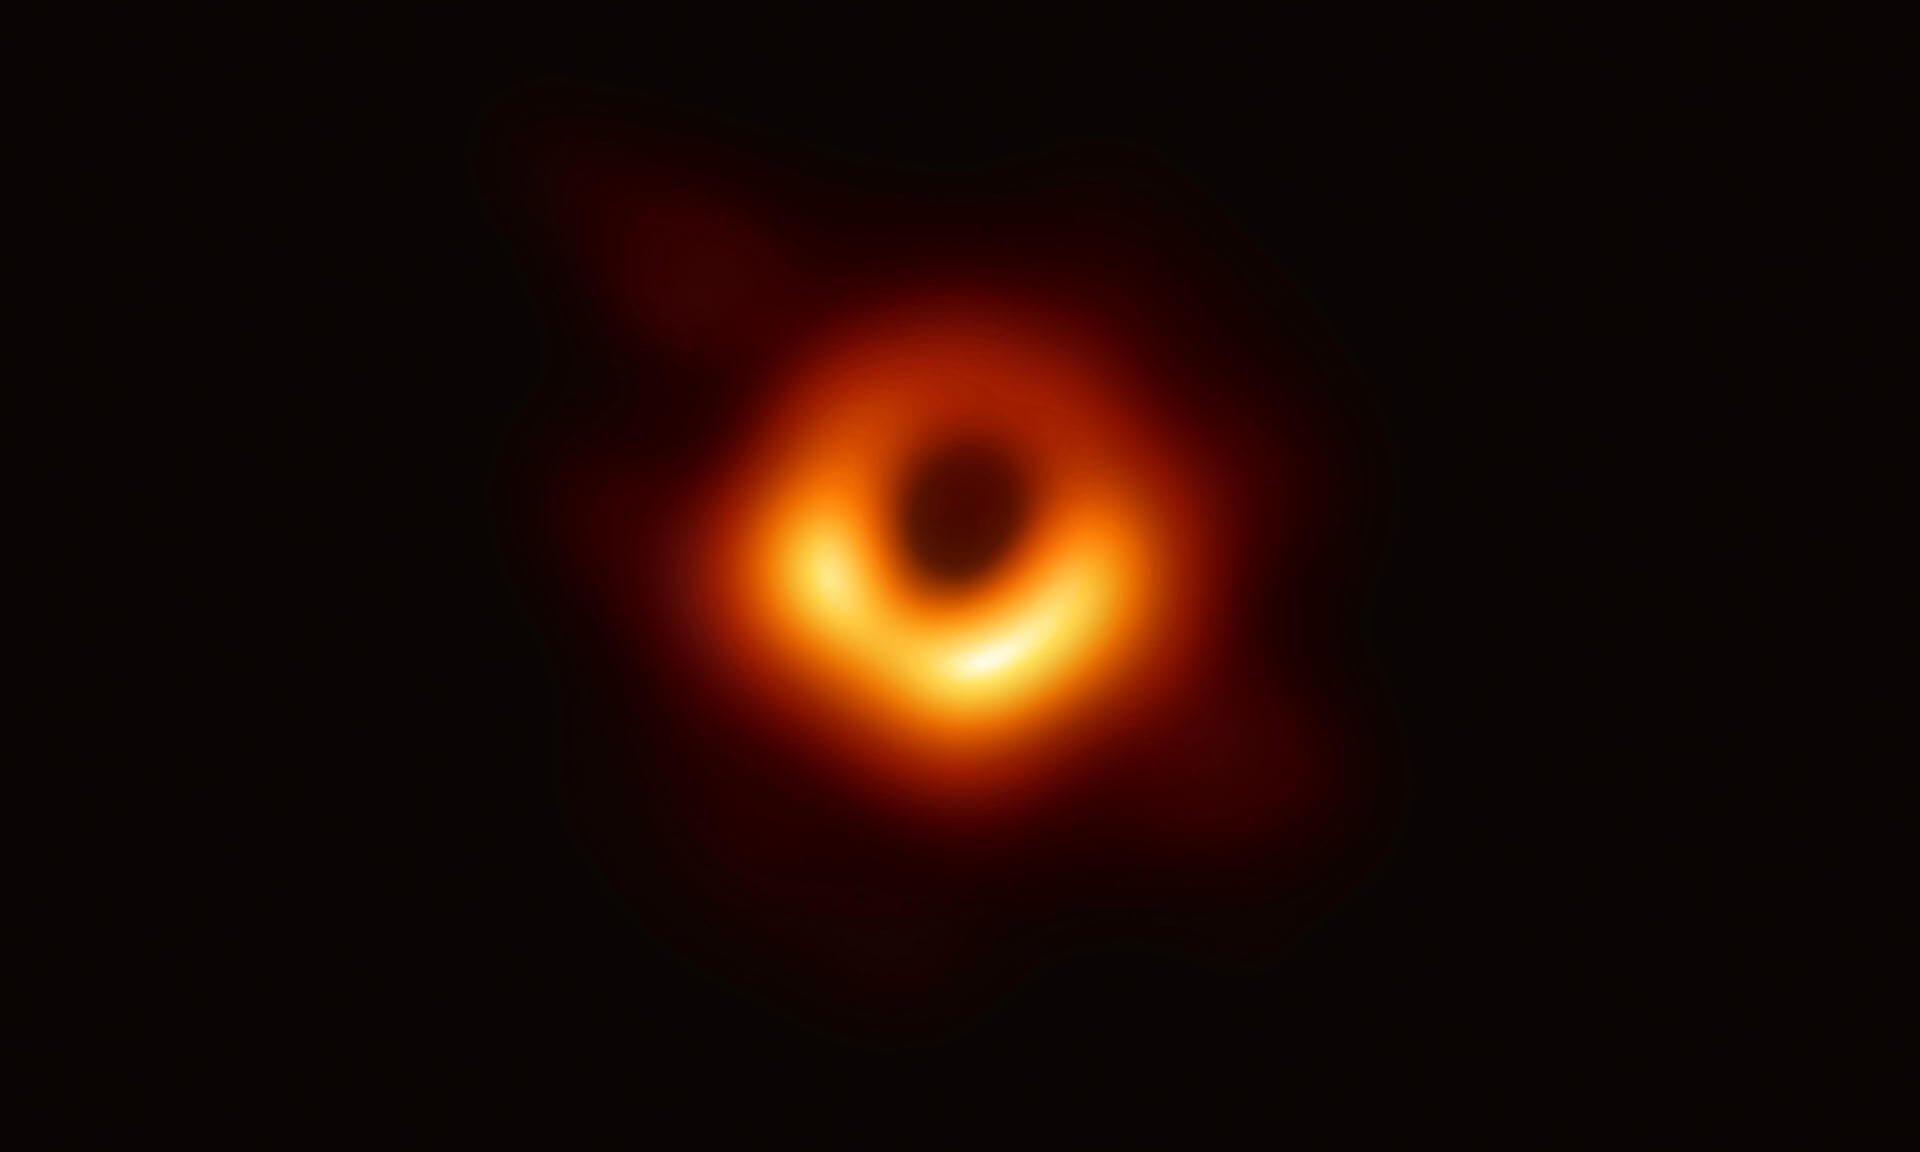 Taking that picture of a black hole required massive amounts of data